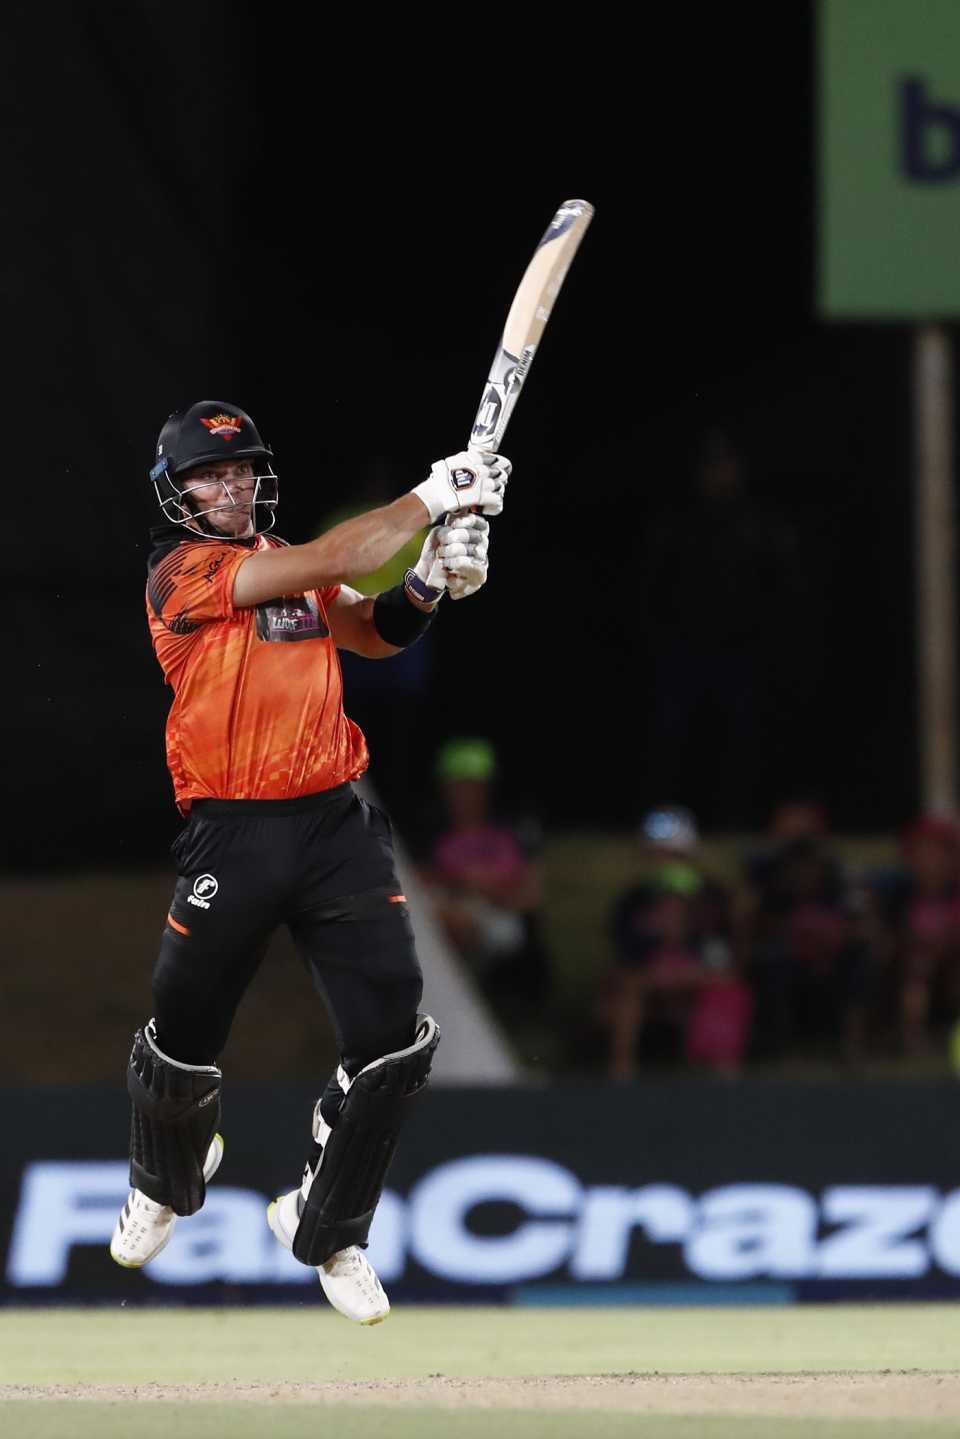 Tristan Stubbs struck a six at a crucial juncture in the game, Paarl Royals vs Sunrisers Eastern Cape, SA20, Paarl, January 19, 2023